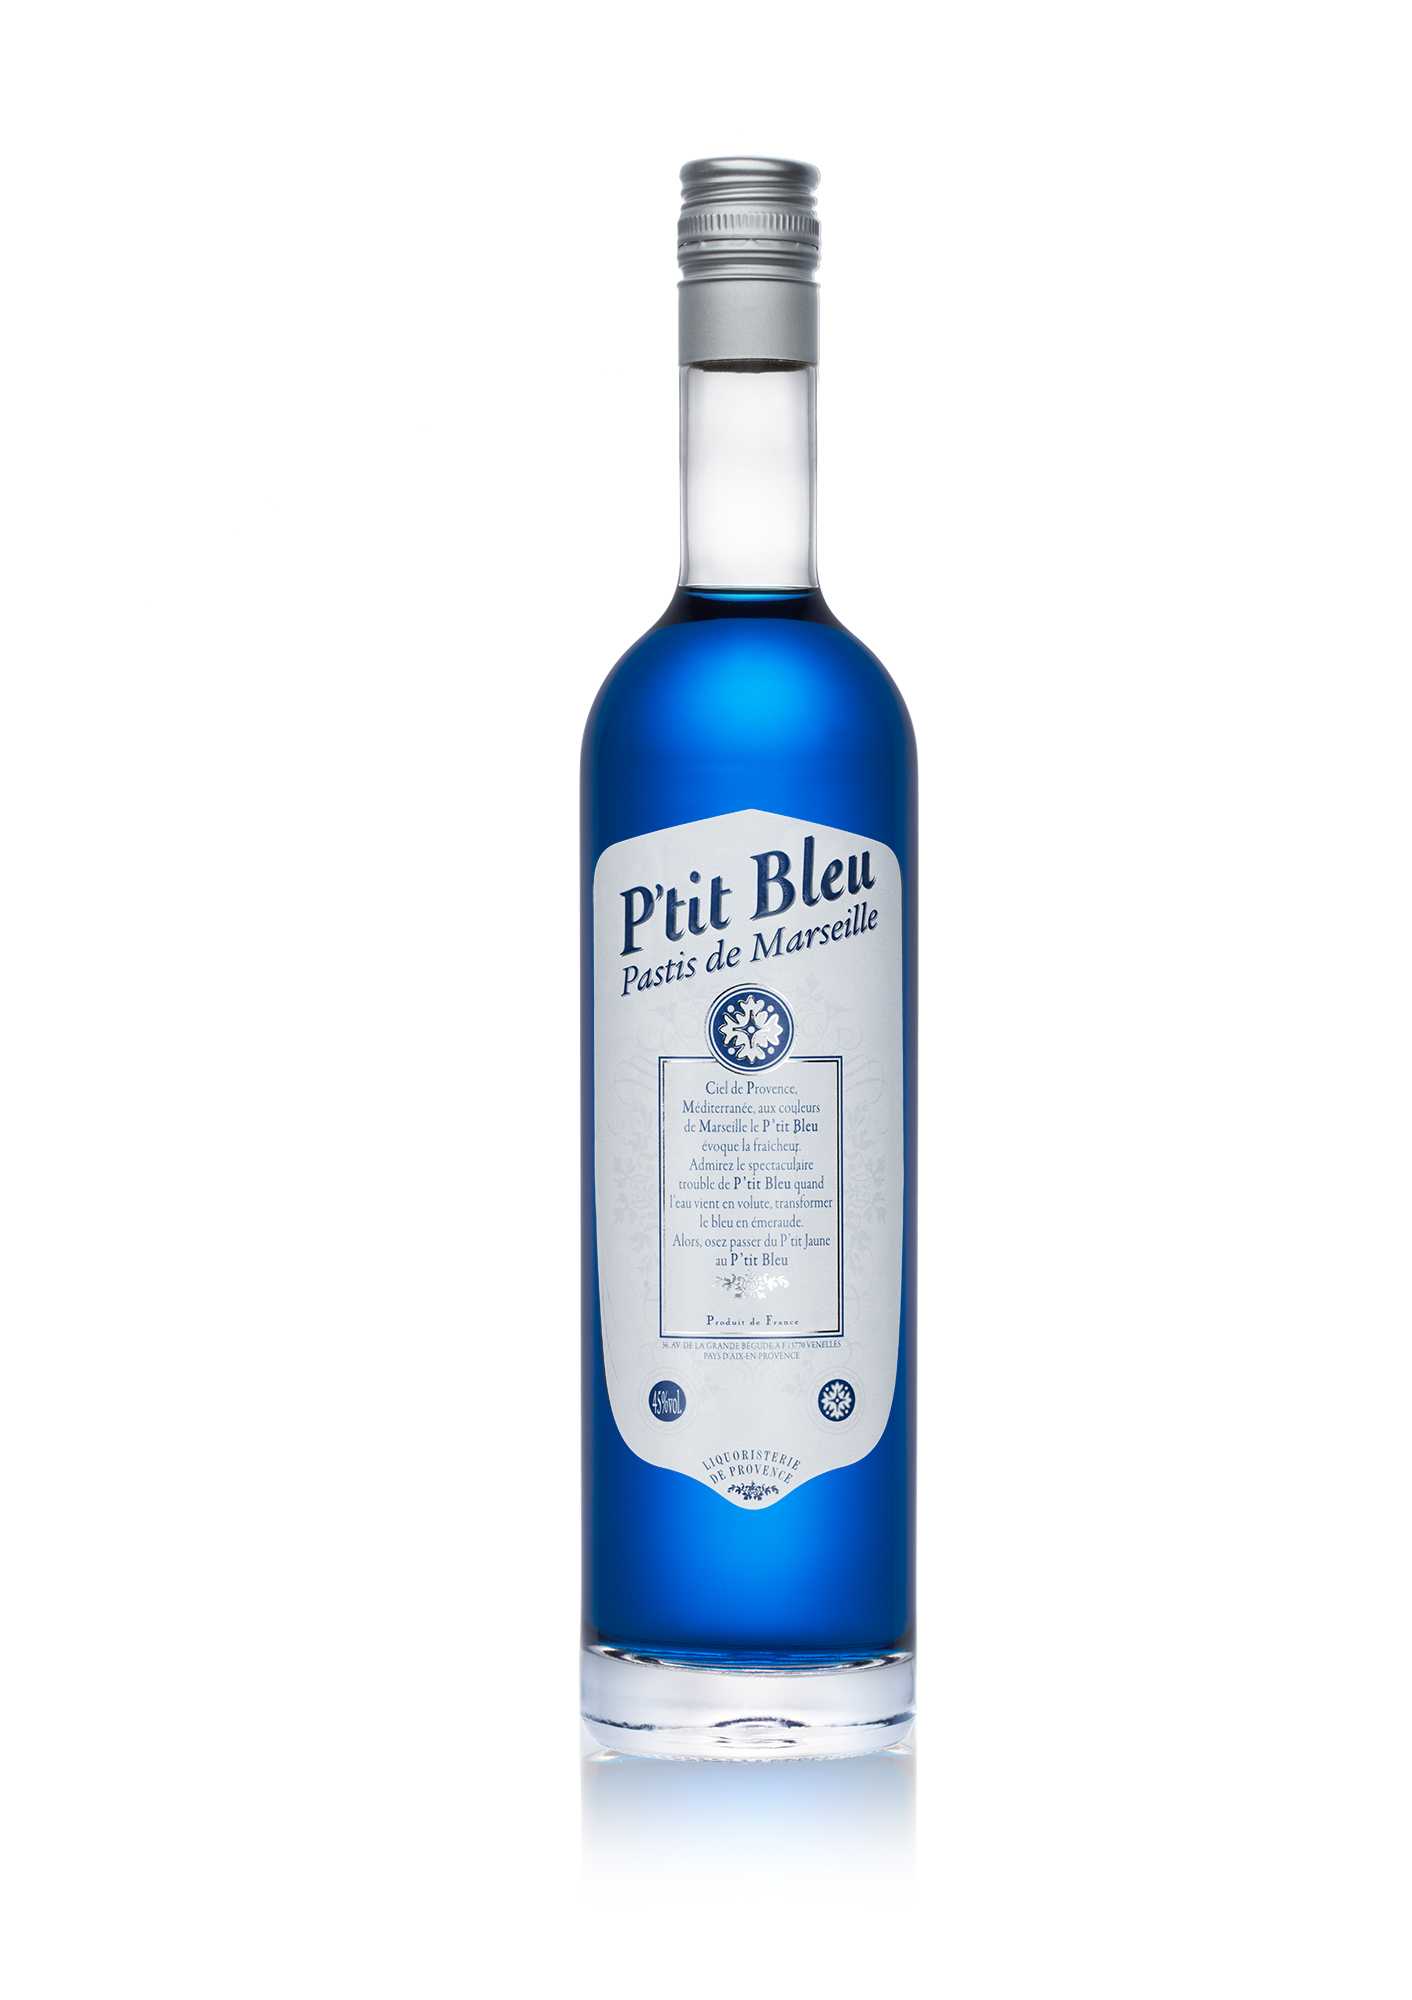 France, Bouches du Rhone, aperitif in Provence with the Pastis Bleu Janot  typical aniseed_flavoured alcohol, here colored in blue - SuperStock